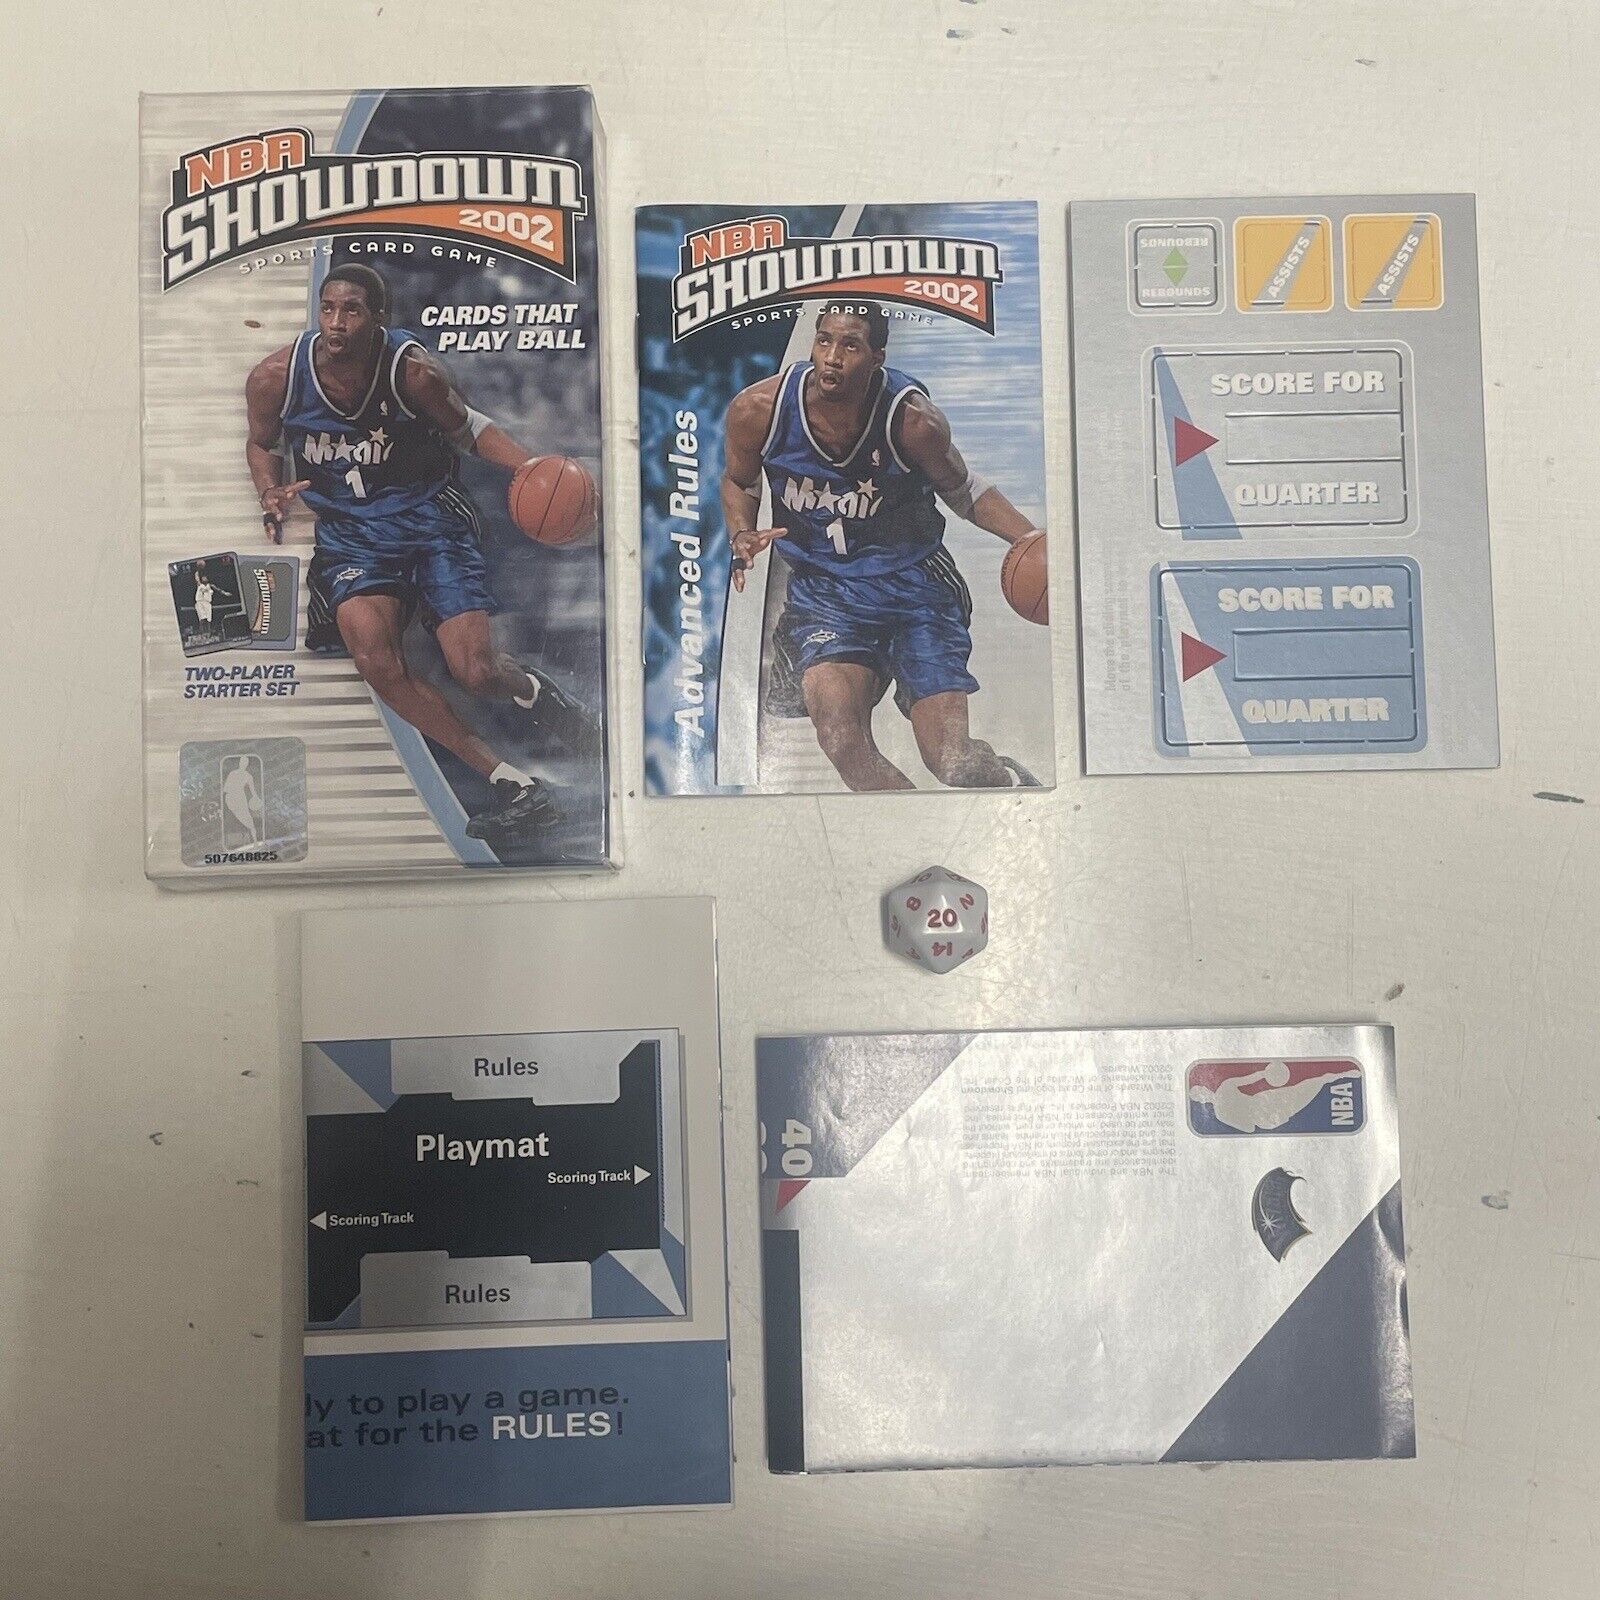 Lotto-2002-NBA-Showdown-Cards-Lot-of-more-than-300-cards-see-PICS-145550400987-8